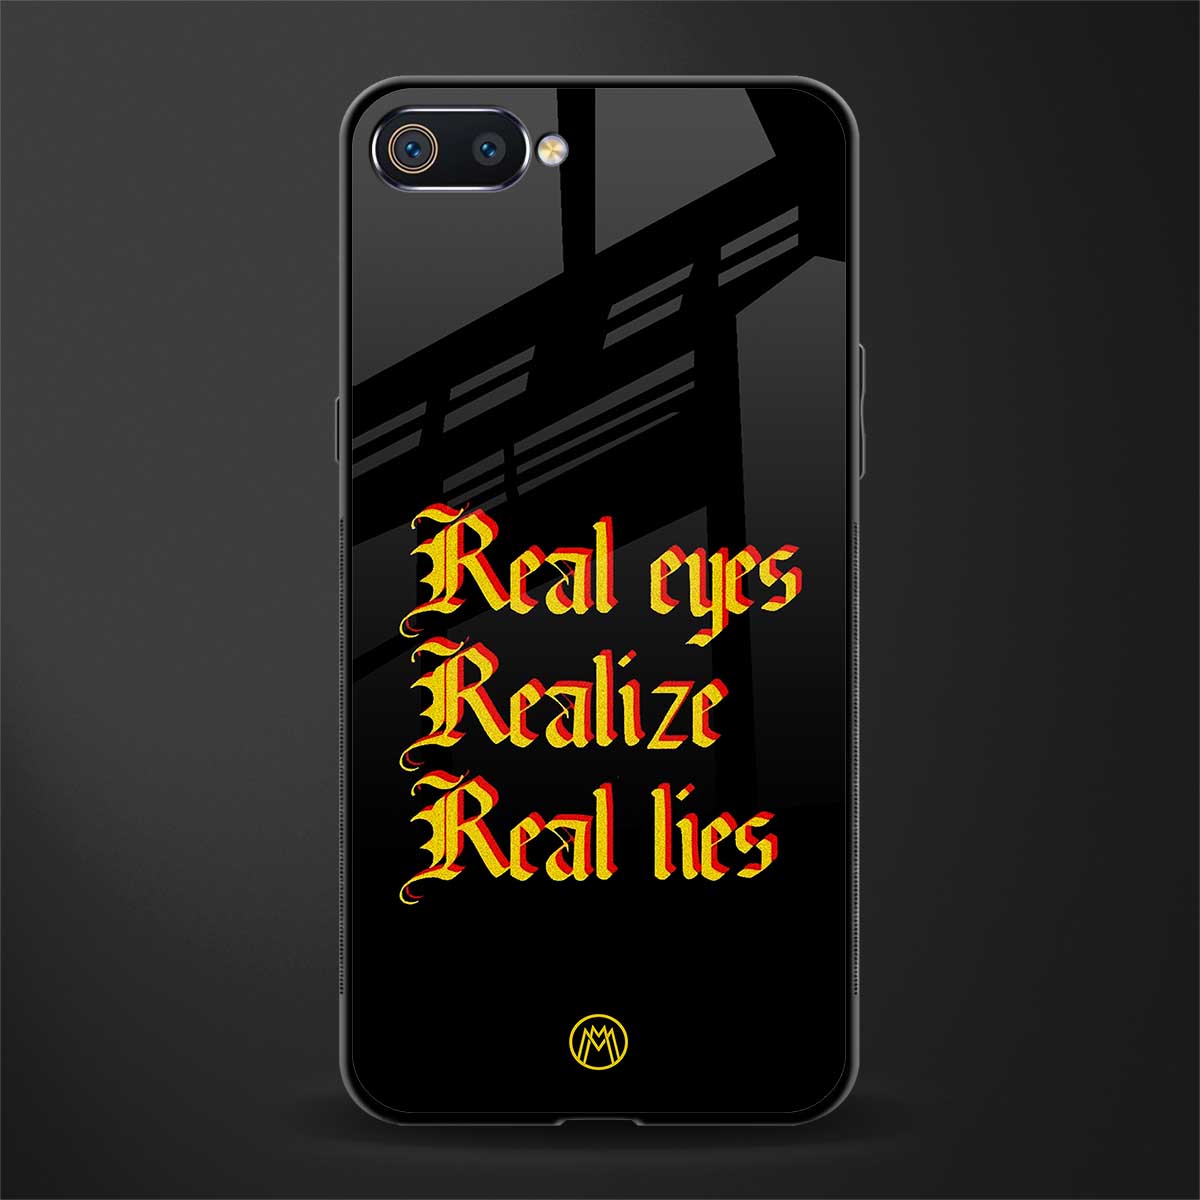 real eyes realize real lies quote glass case for realme c2 image